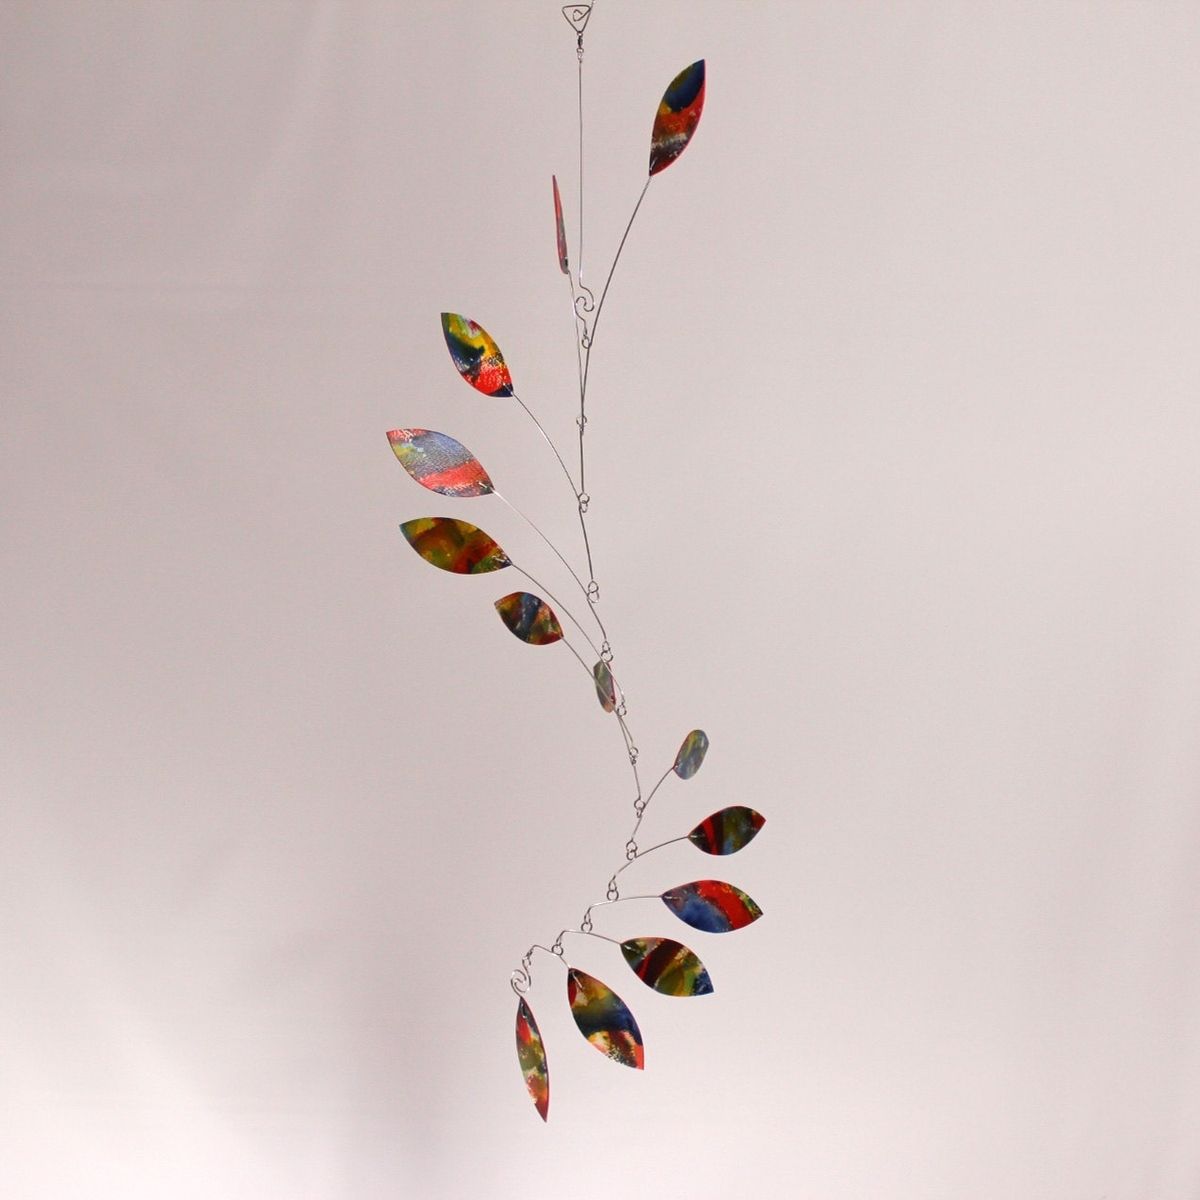 Buy a Custom Mobile Art Acapulco Wave - Hanging Sculpture In Rainbow ...